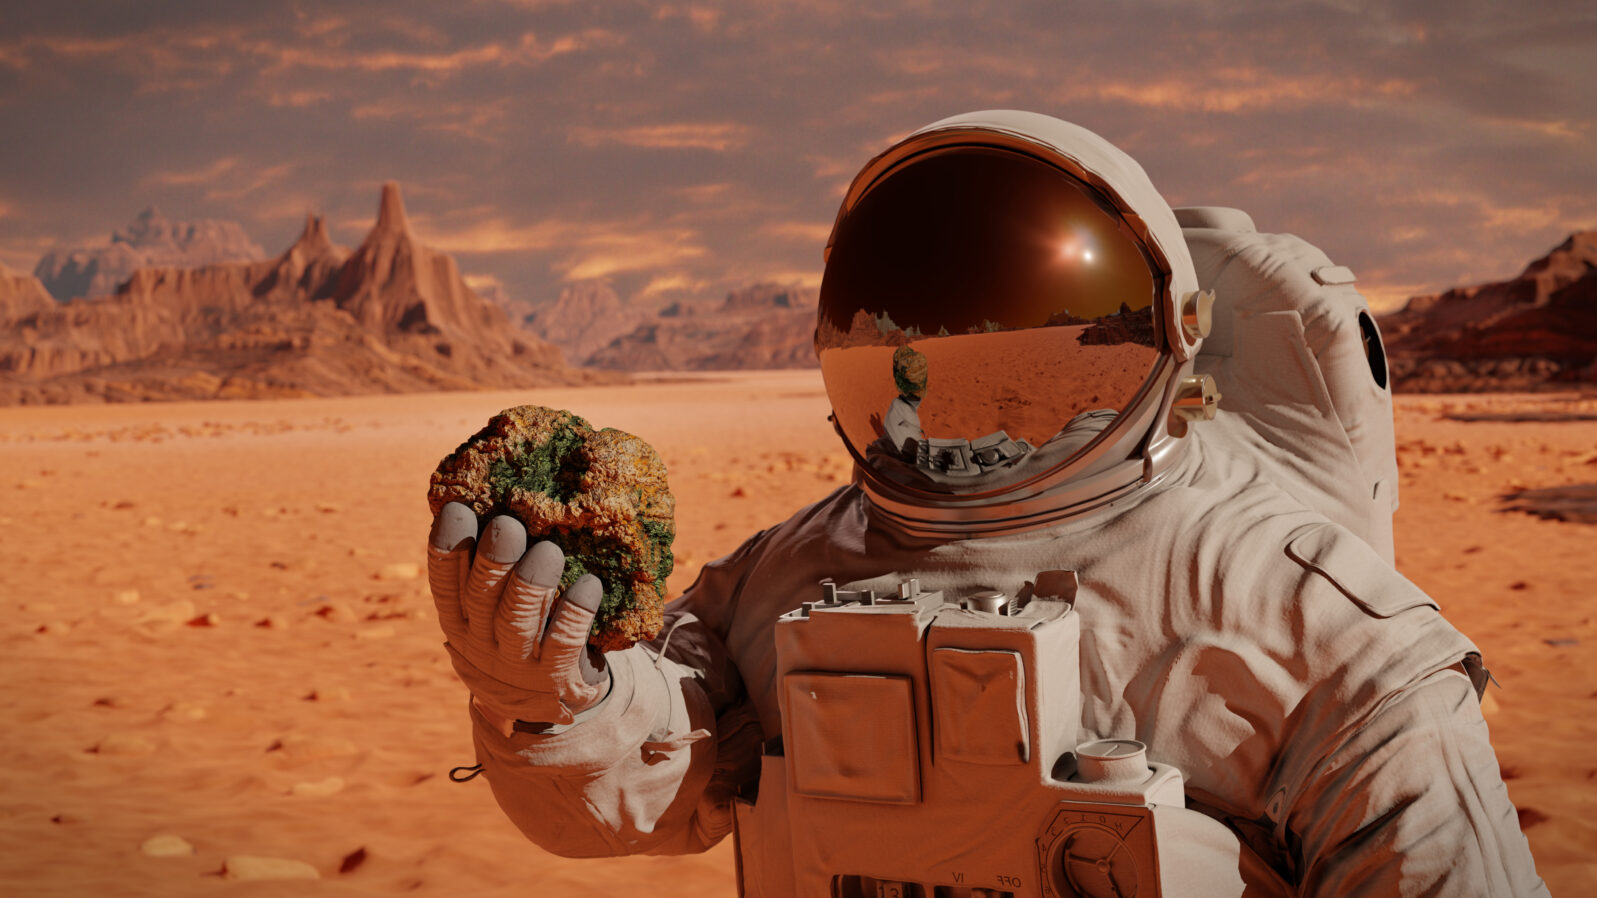 life on planet Mars, astronaut discovers bacterial life on the surface of a rock